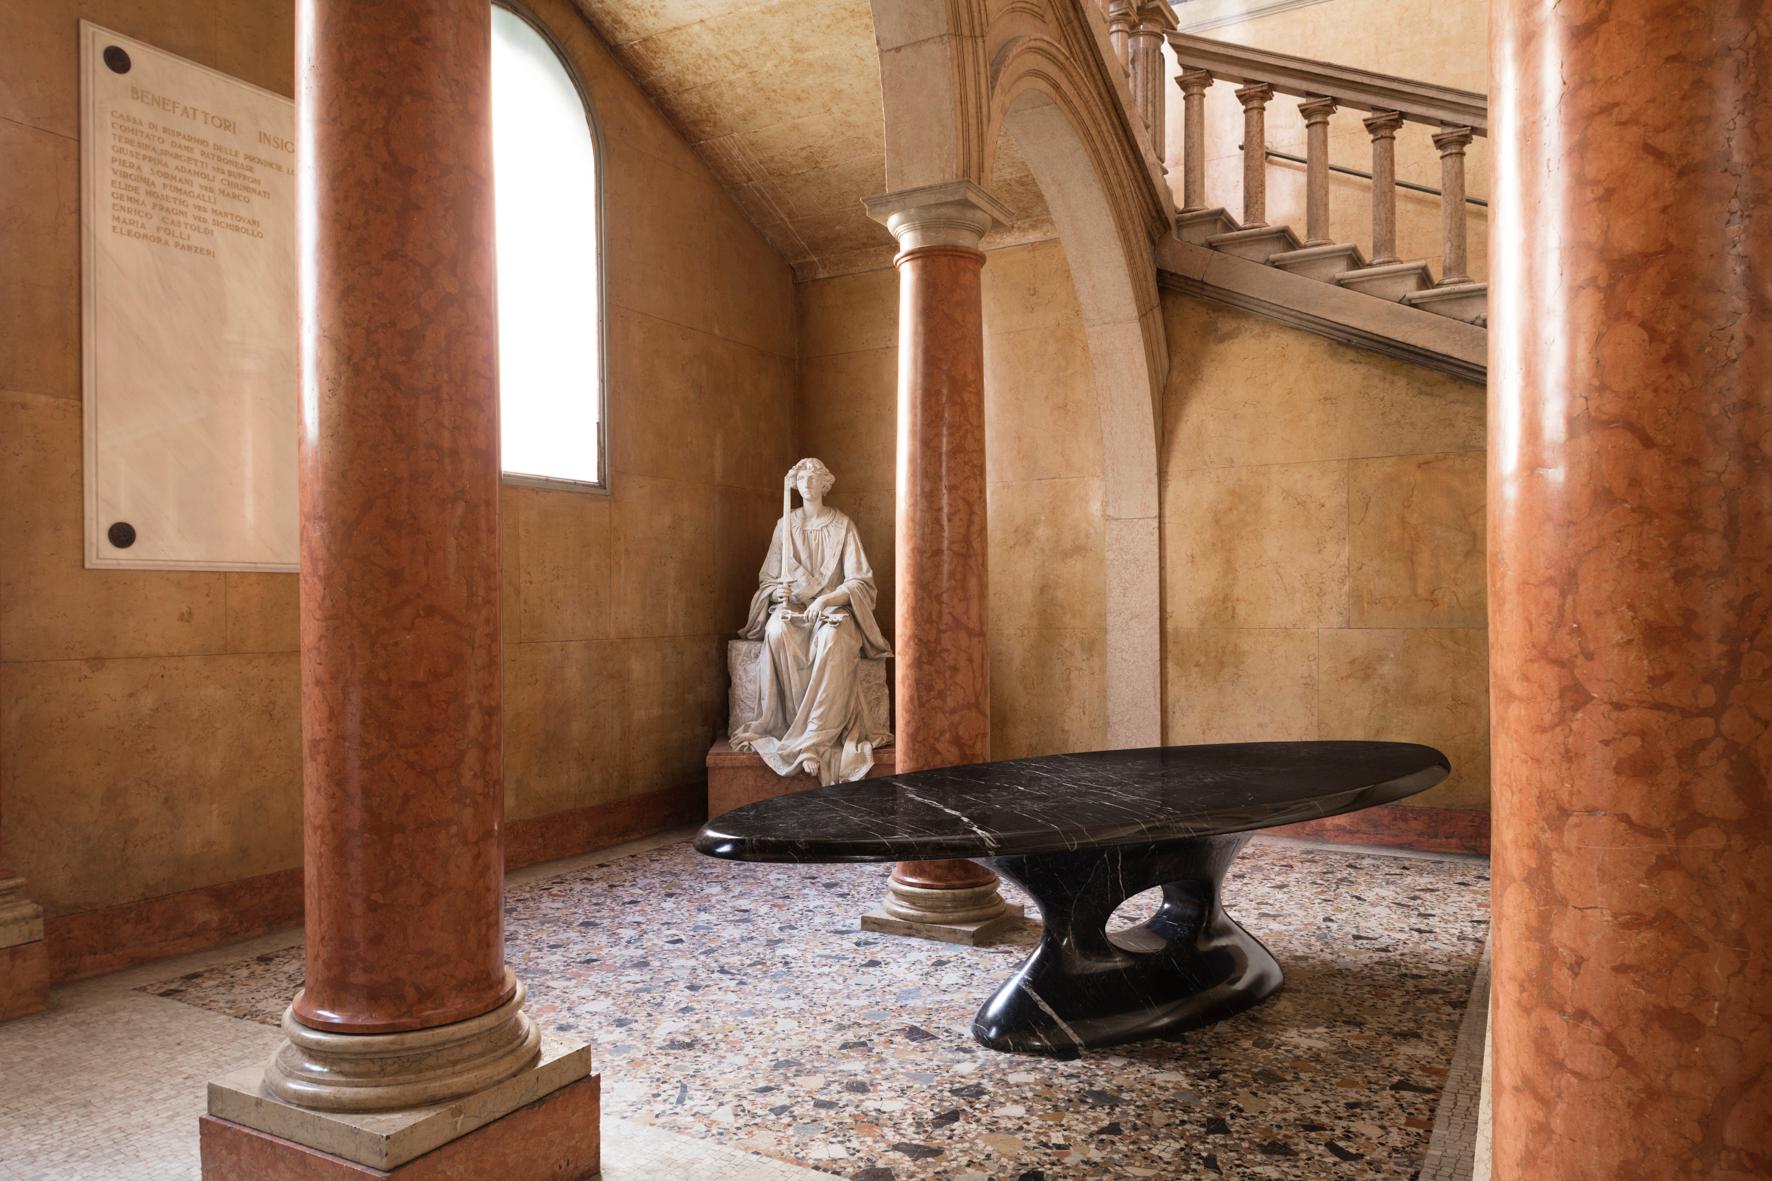 The table is shaped thinking of the figures of the Renaissance’s paintings.
The table is sculpted from a solid block of Nero Marquina marble.
Design by Mattia Biagi and Cardenio Petrucci.
Introduced at the Fuori Salone at Milan Design Week 2023.